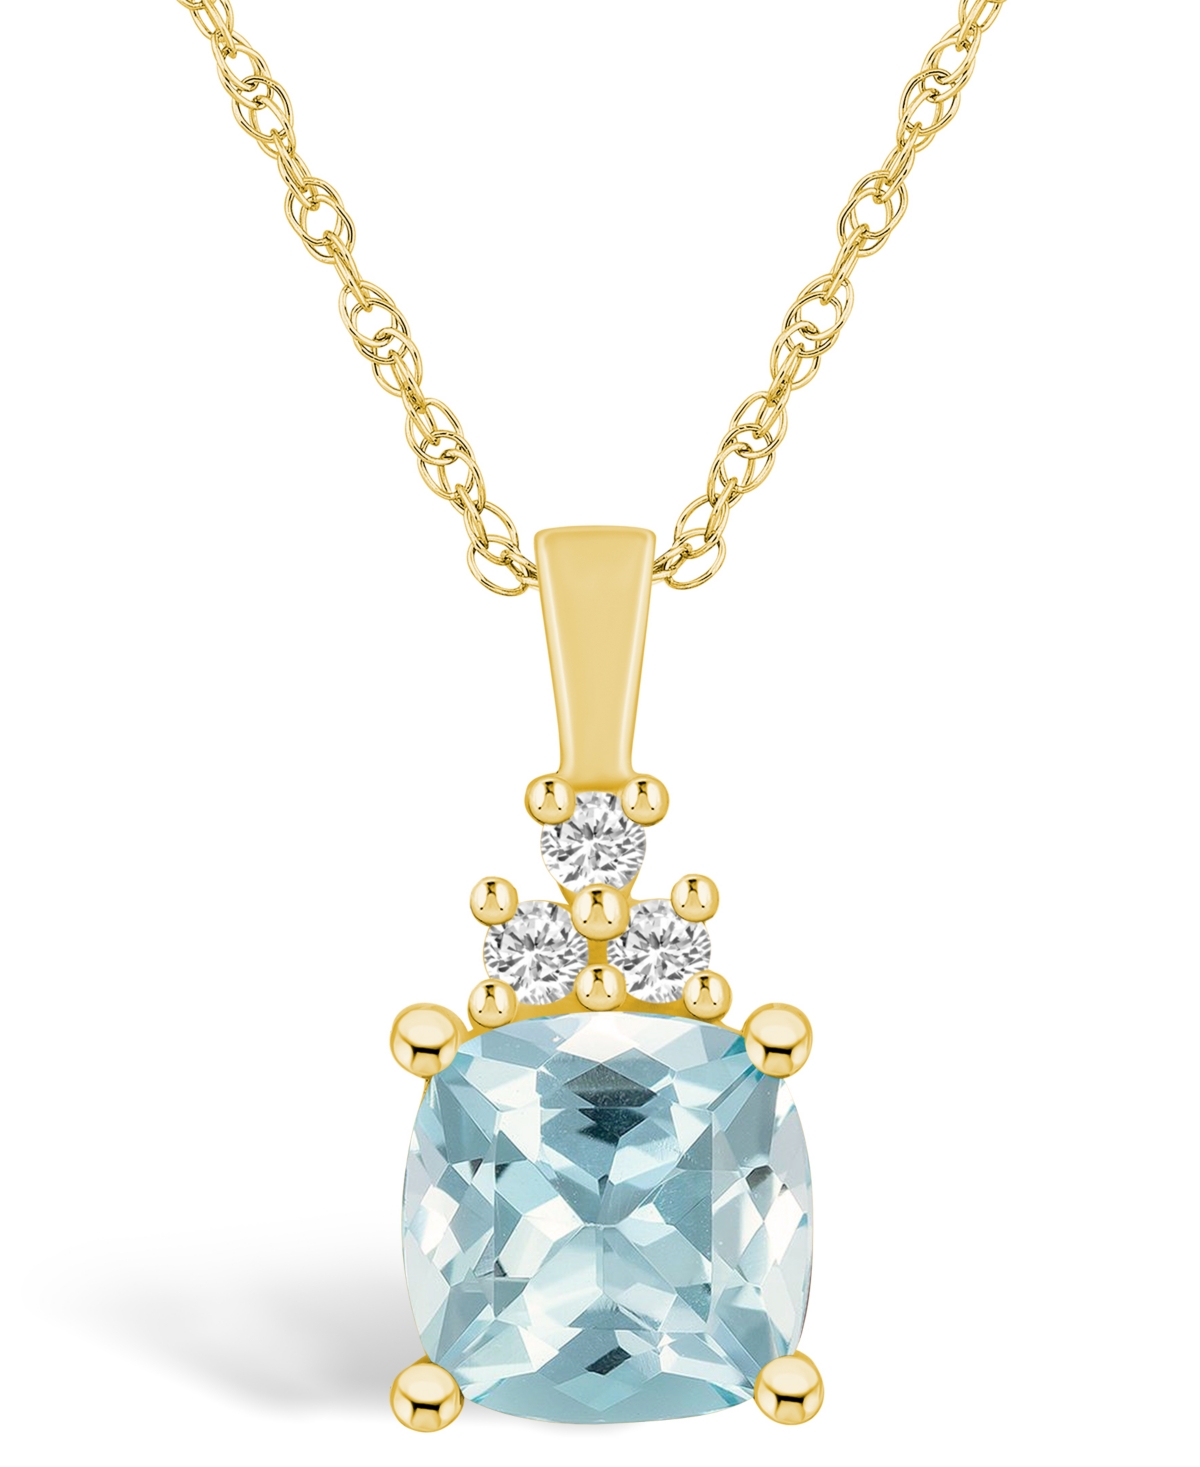 Macy's Aquamarine (2 Ct. T.w.) And Diamond (1/10 Ct. T.w.) Pendant Necklace In 14k Yellow Gold